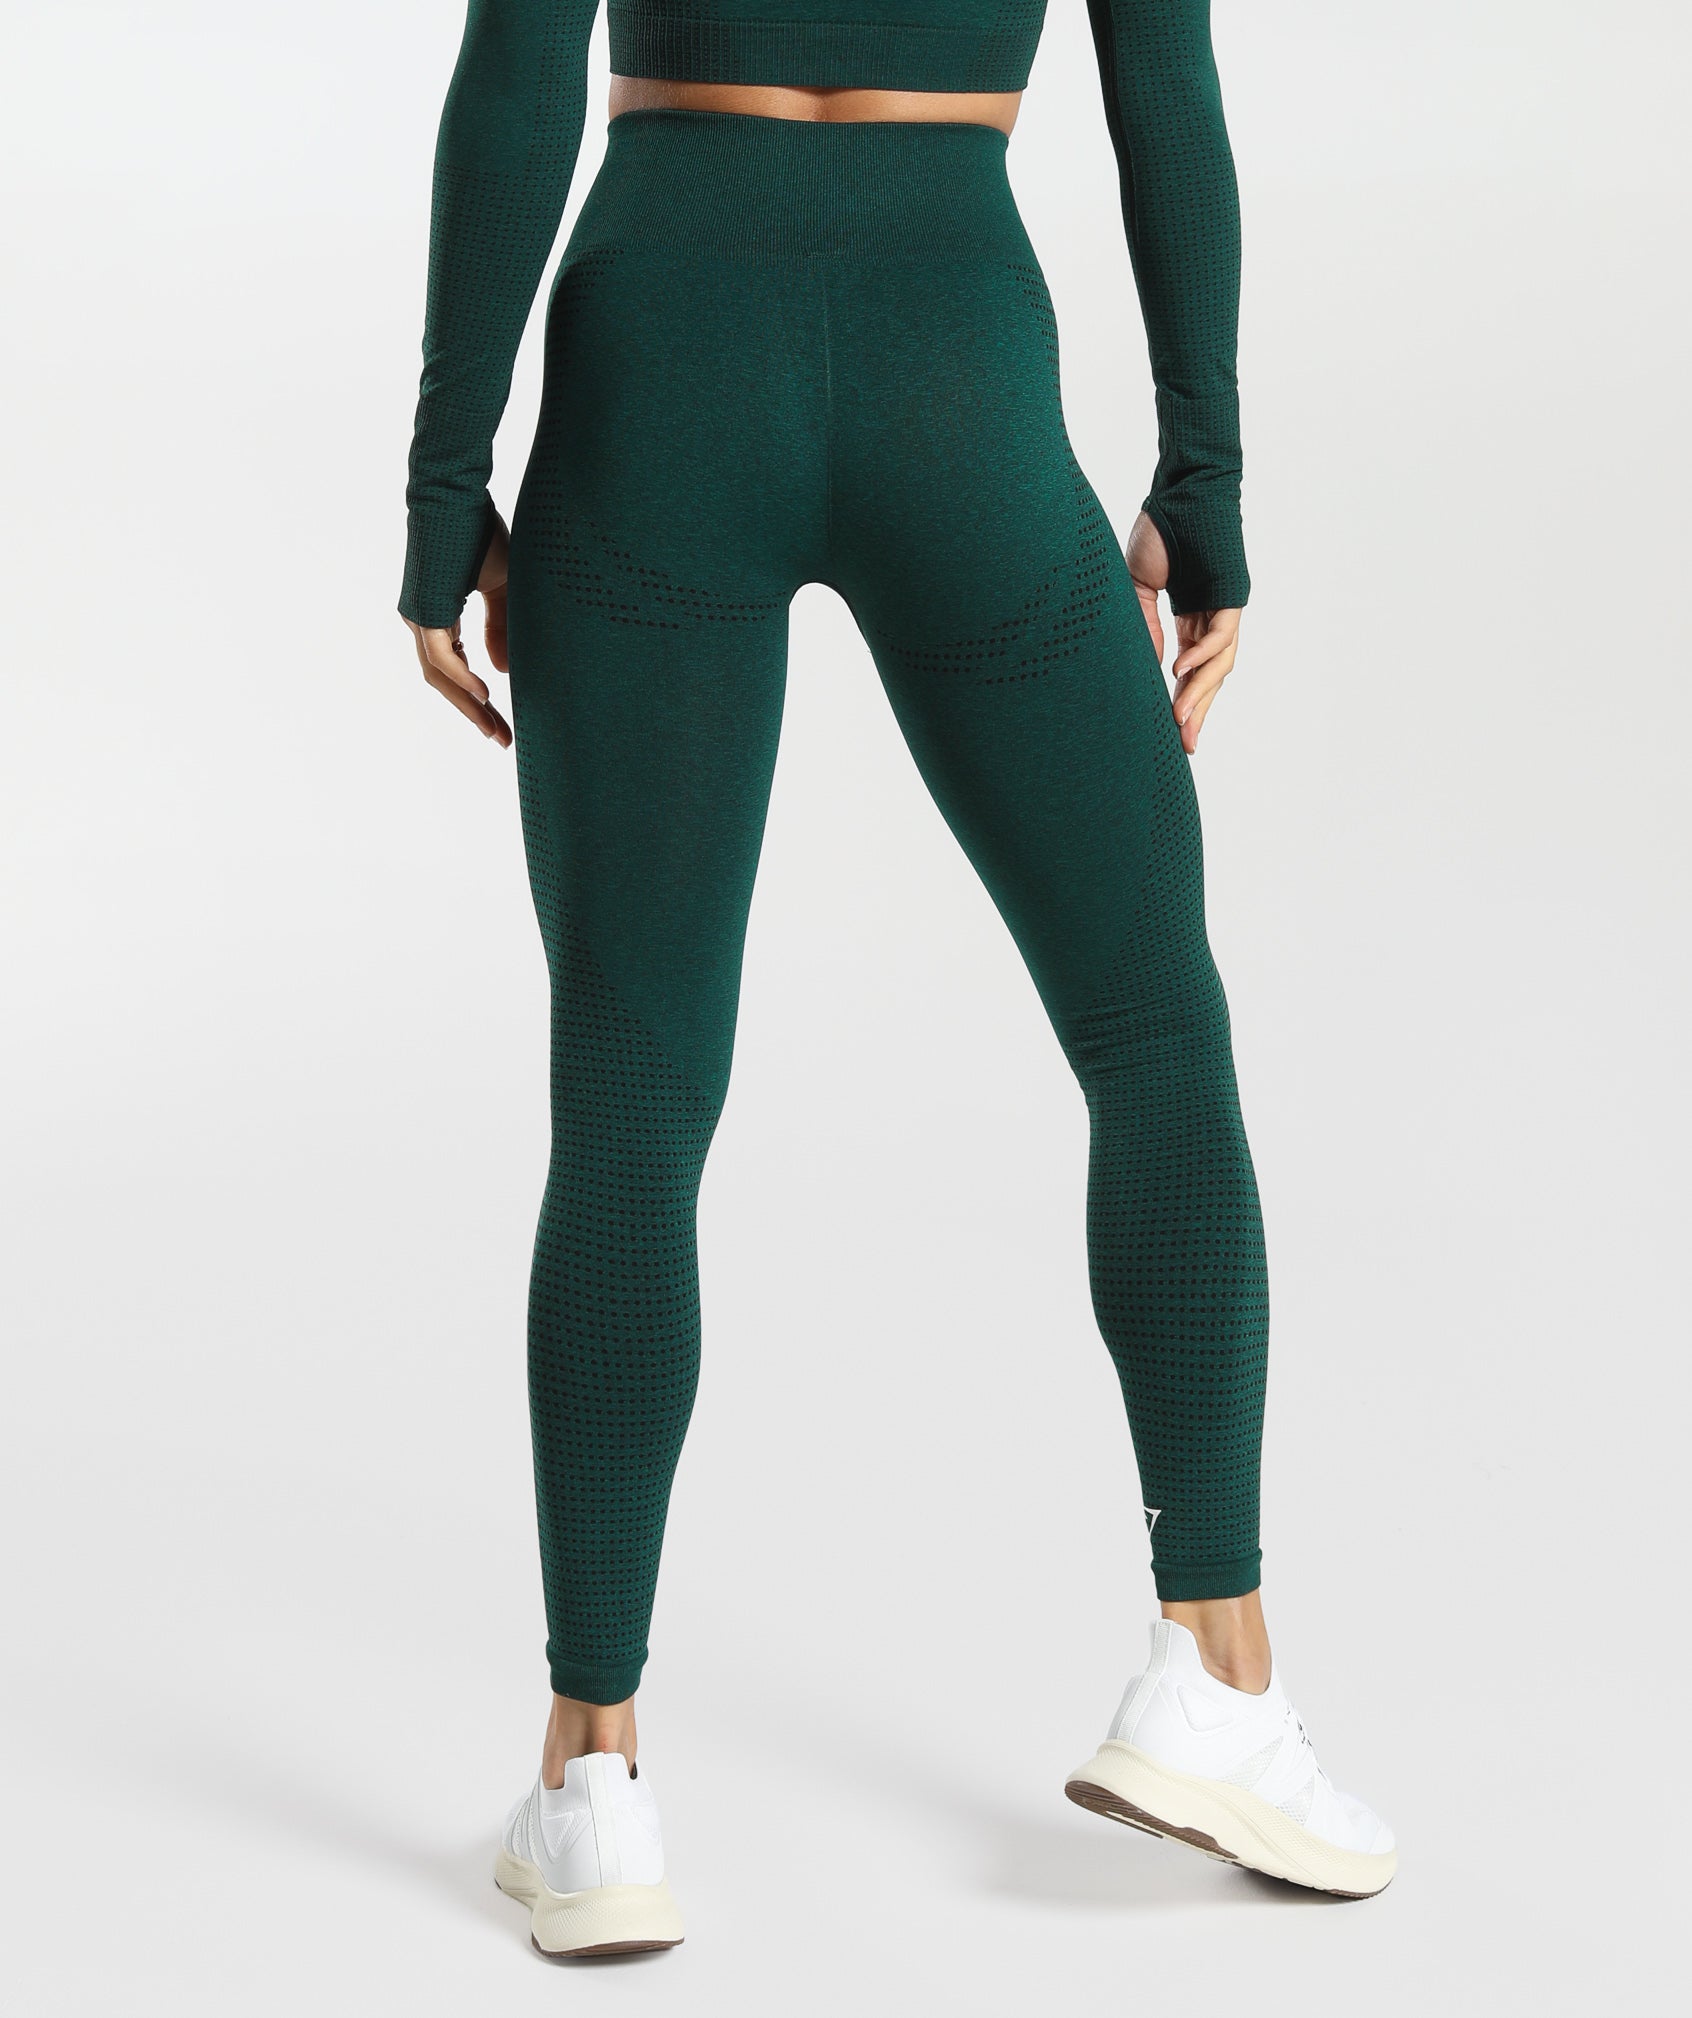 Gymshark Training Leggings Review 2021  International Society of Precision  Agriculture